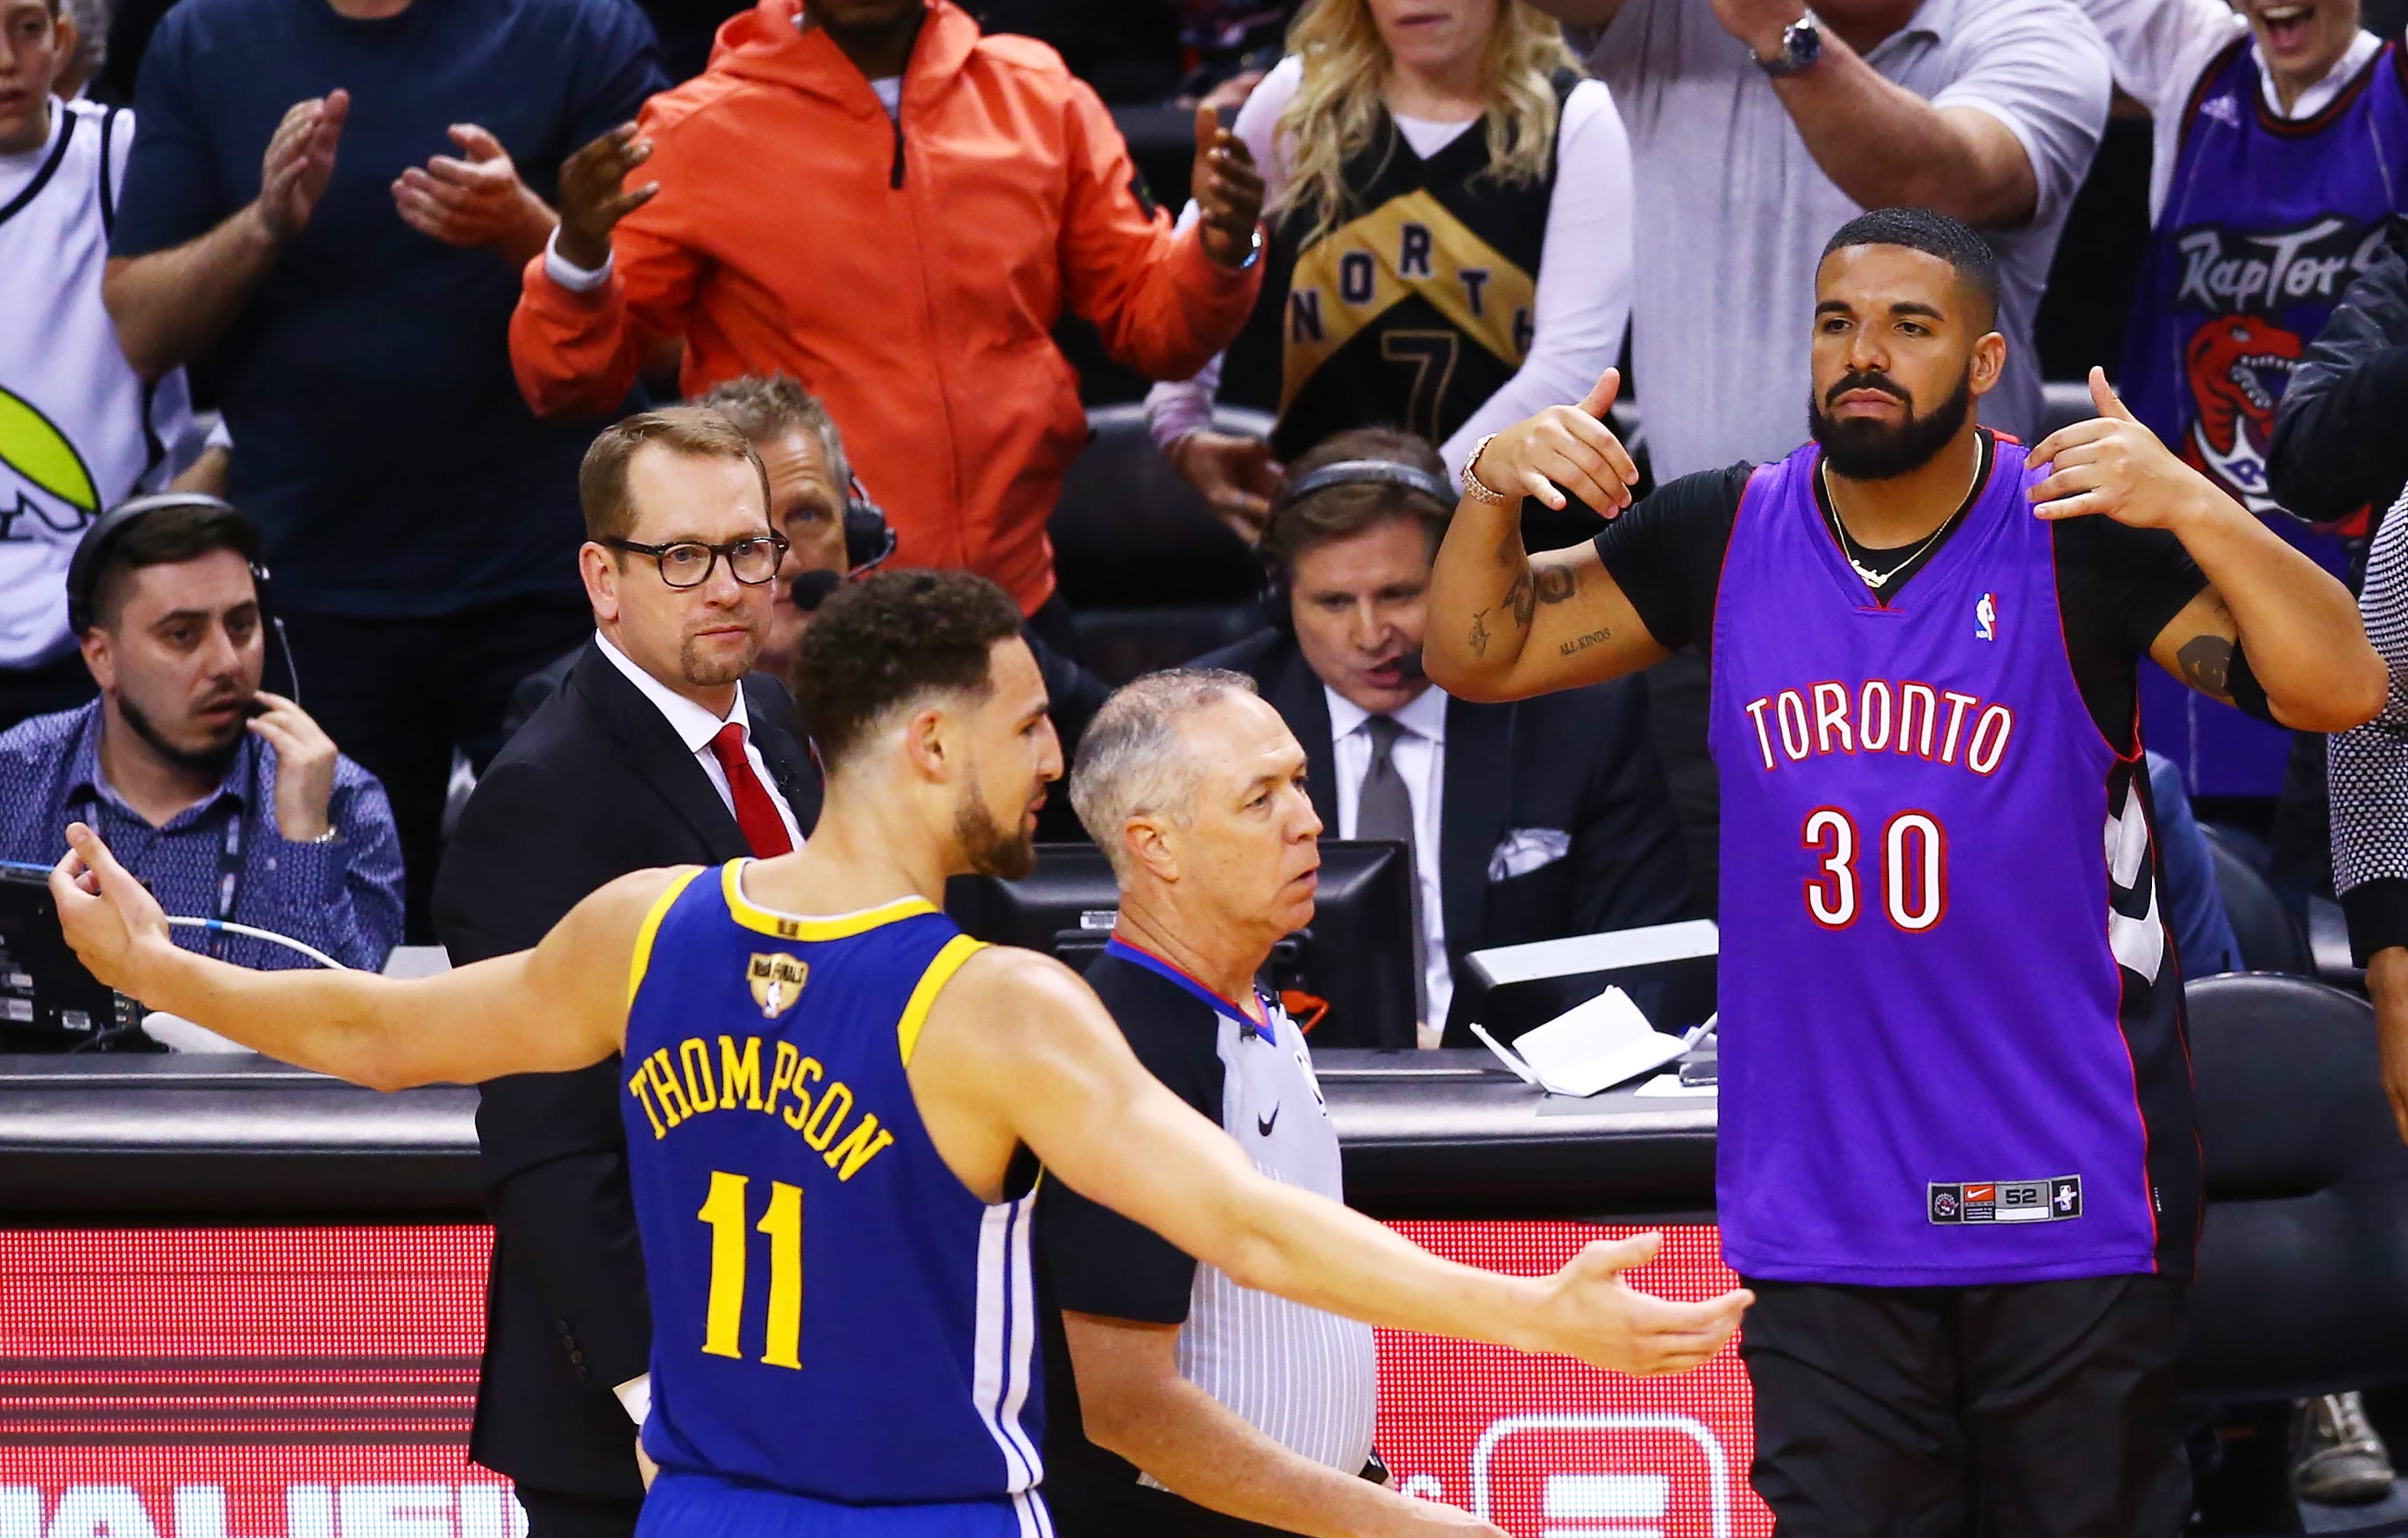 Drake beat Steph to sporting a Dell Curry Raptors jersey at NBA Finals